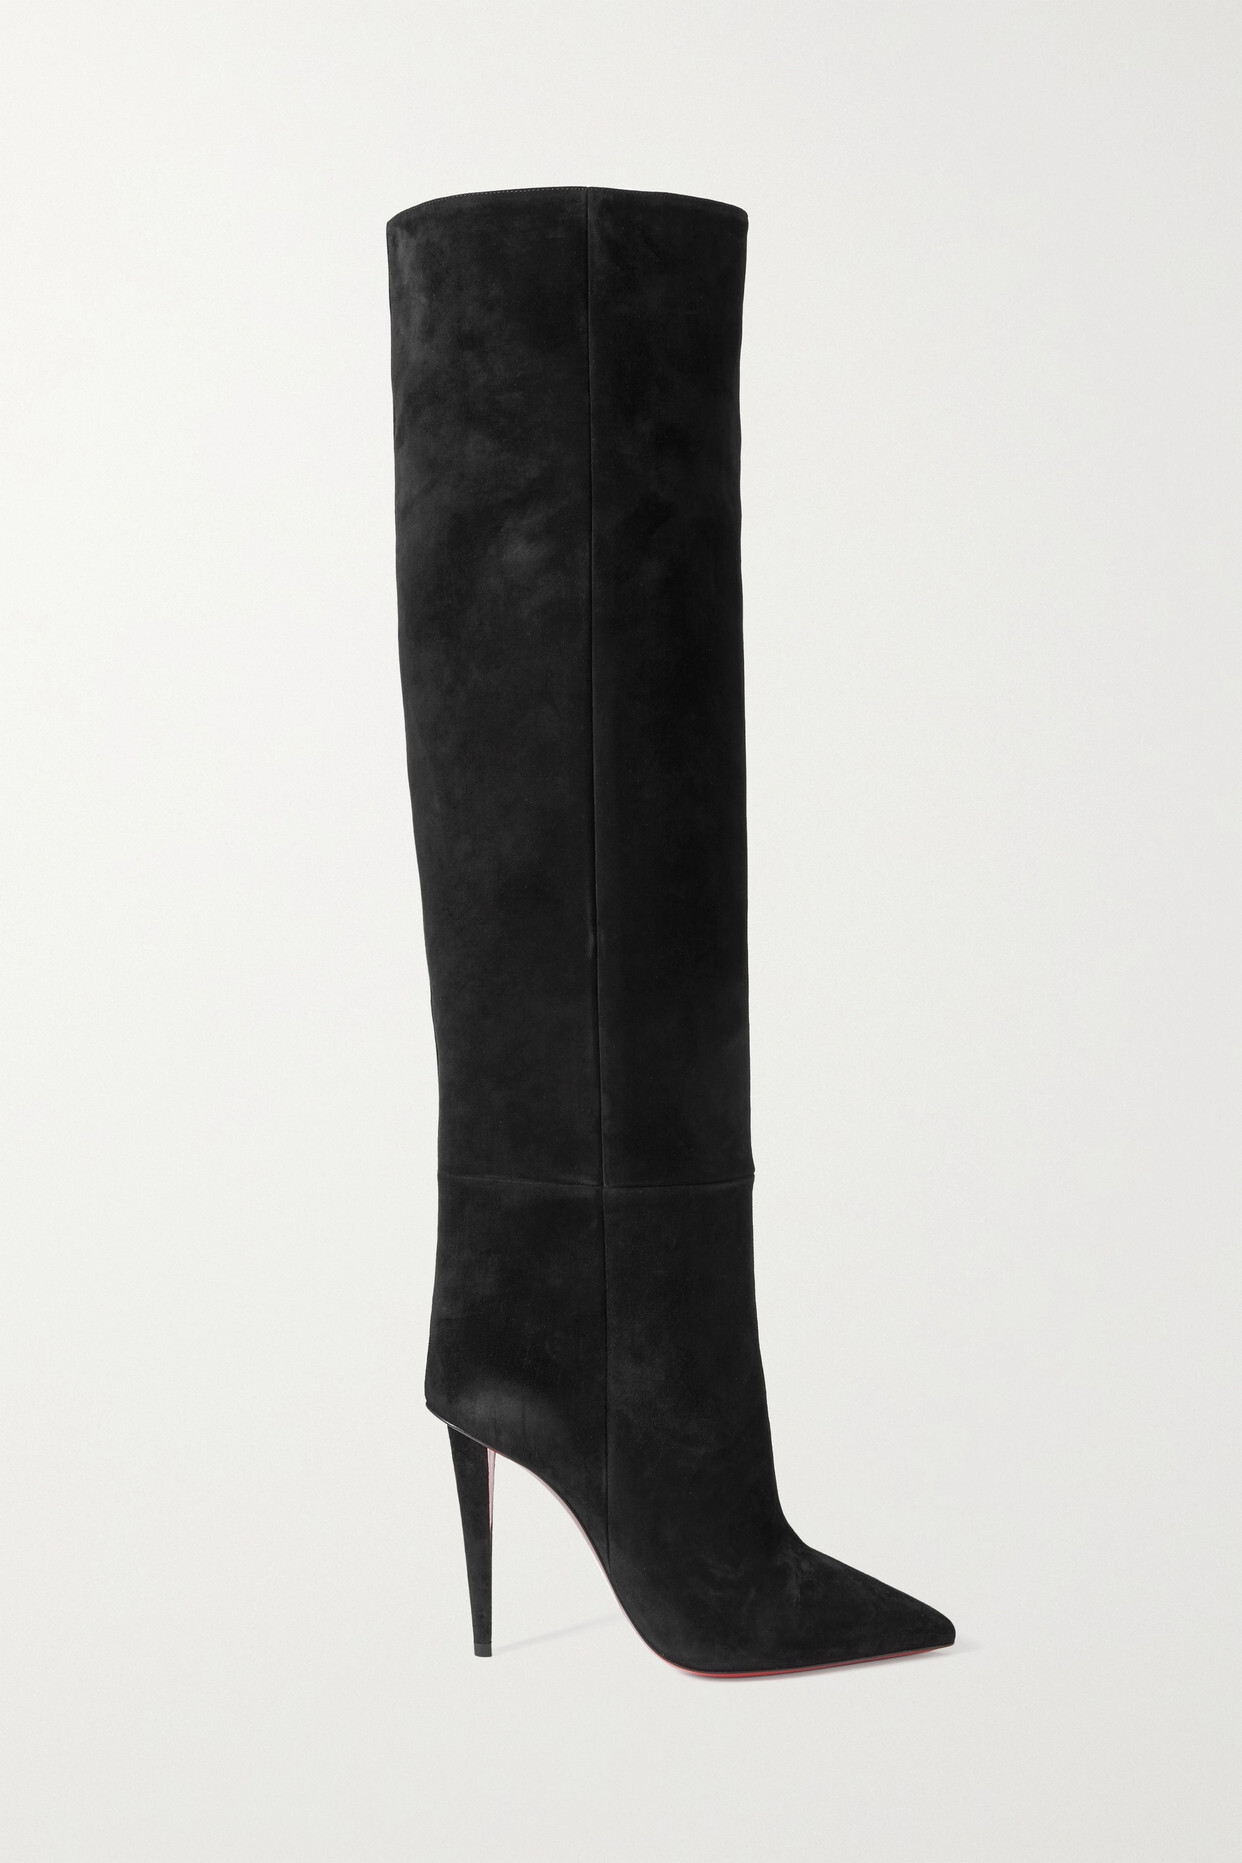 Christian Louboutin - Astrilarge Botta 100 Suede Knee Boots - Black